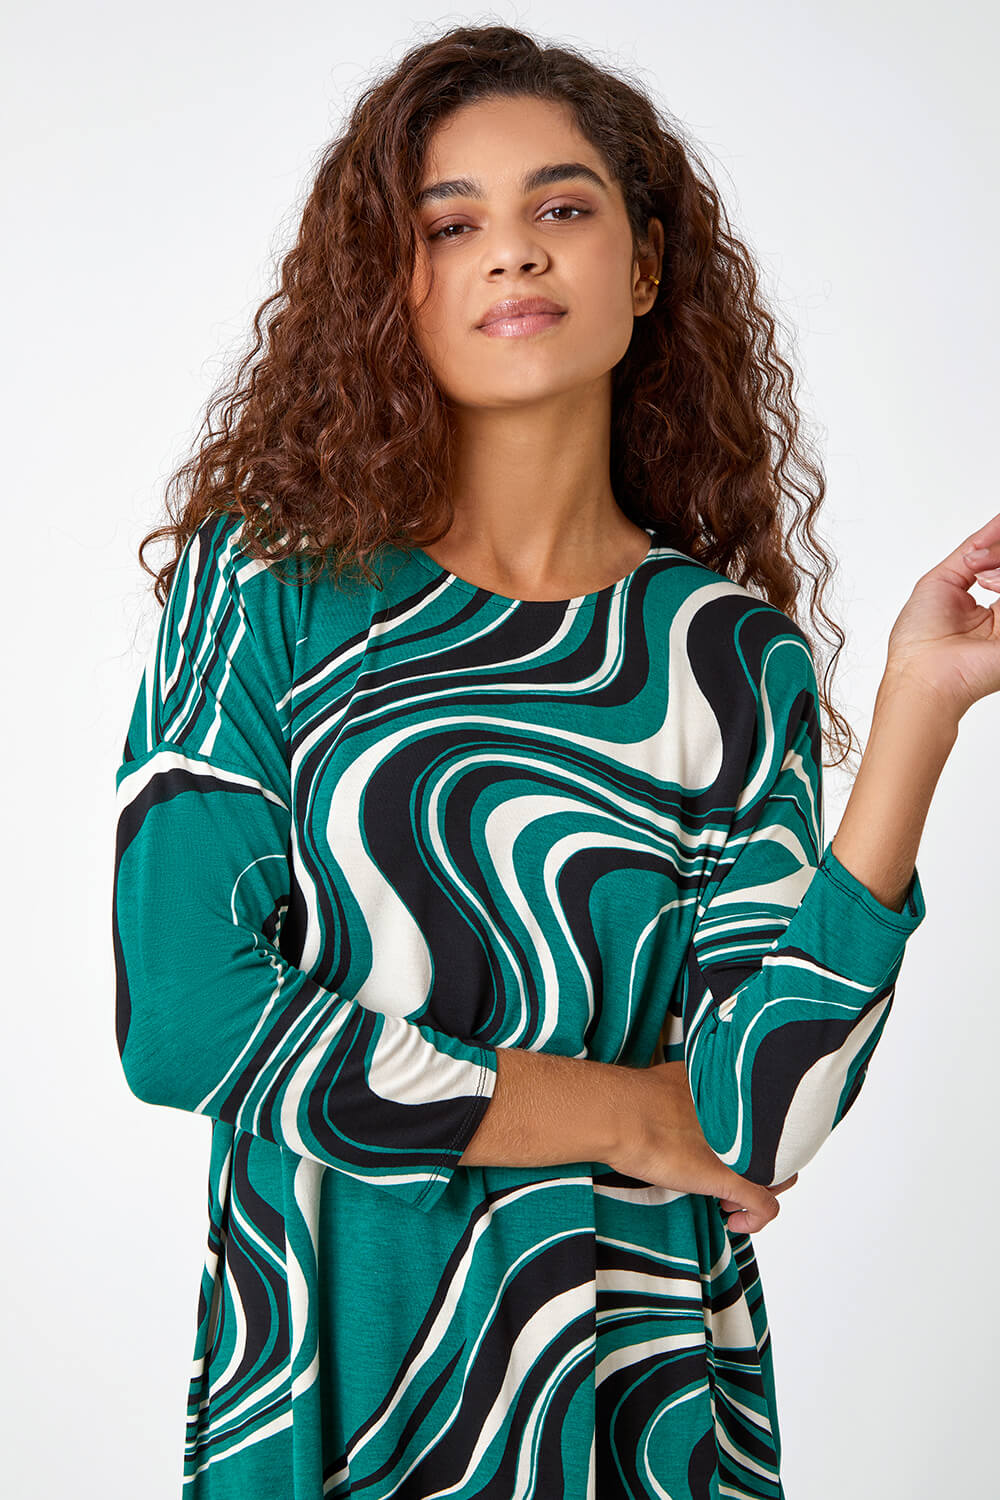 Green Swirl Print Tie Back Stretch Top, Image 5 of 5